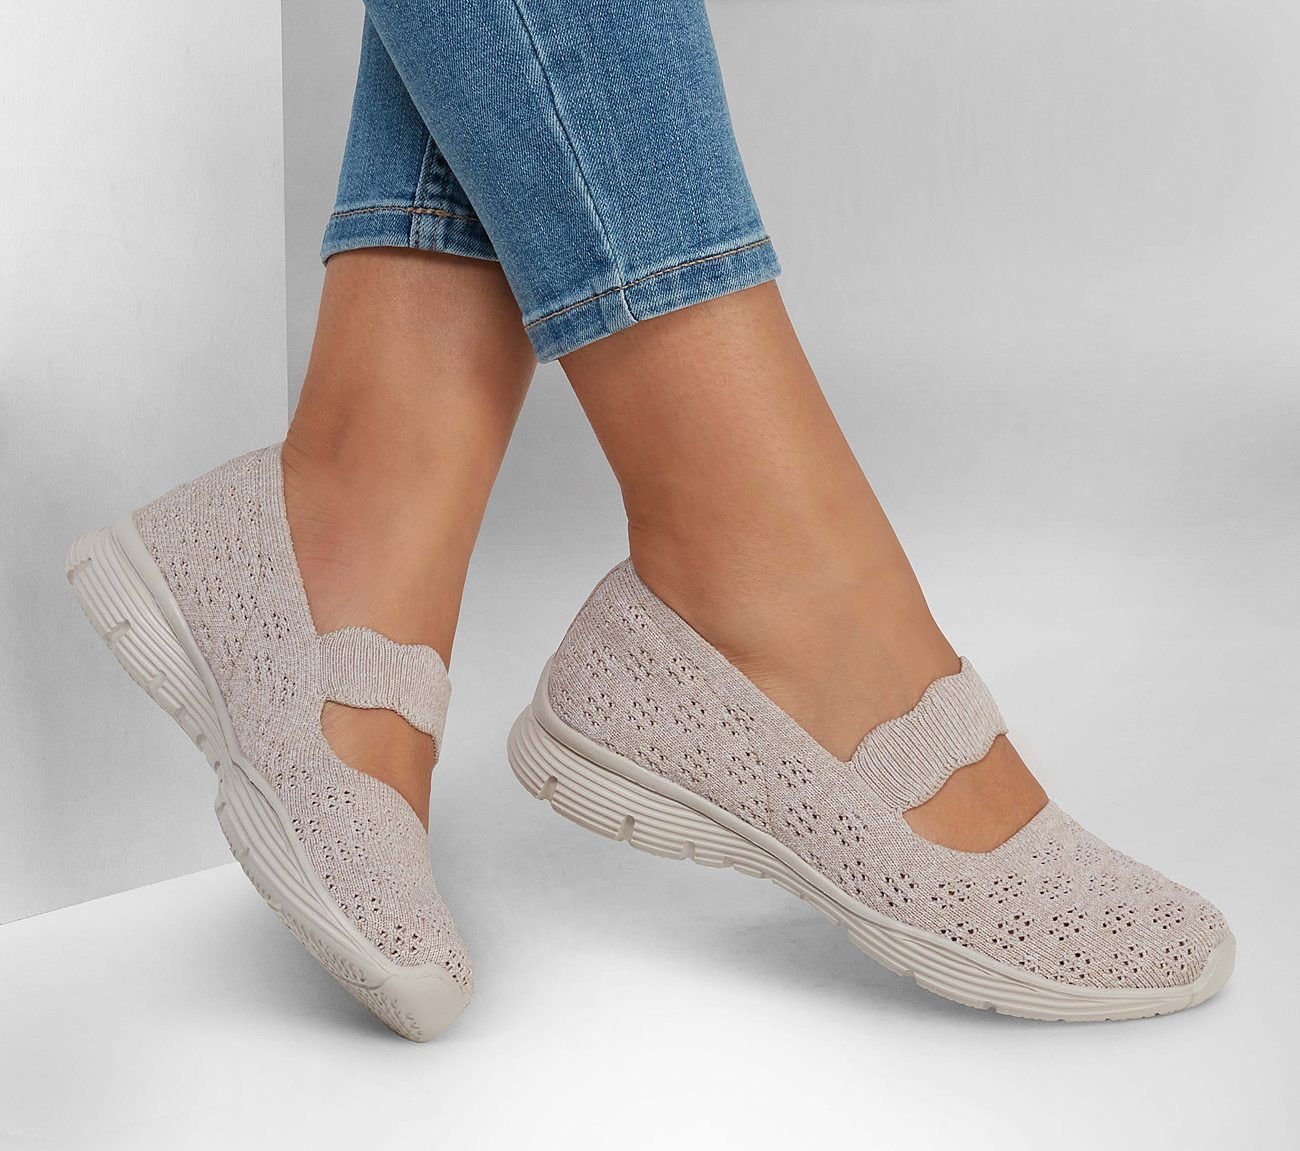 Seager - Simple Things Ballerina Skechers